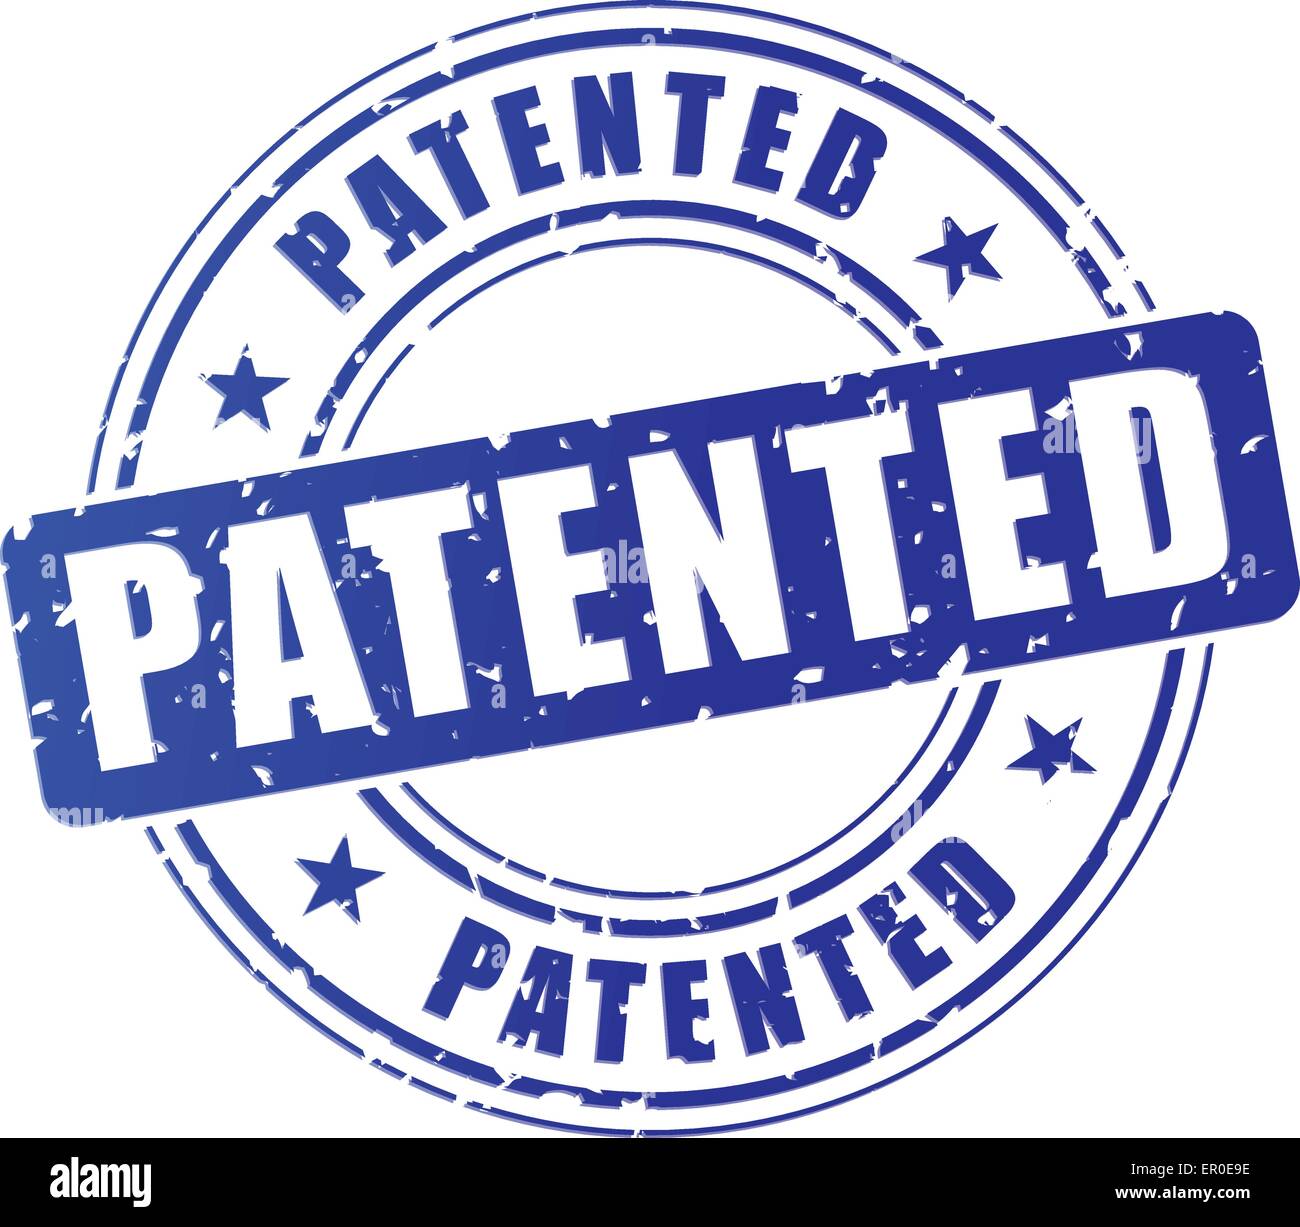 Patented product. Значок запатентовано. Запатентовано печать. Значок патента. Patented без фона.